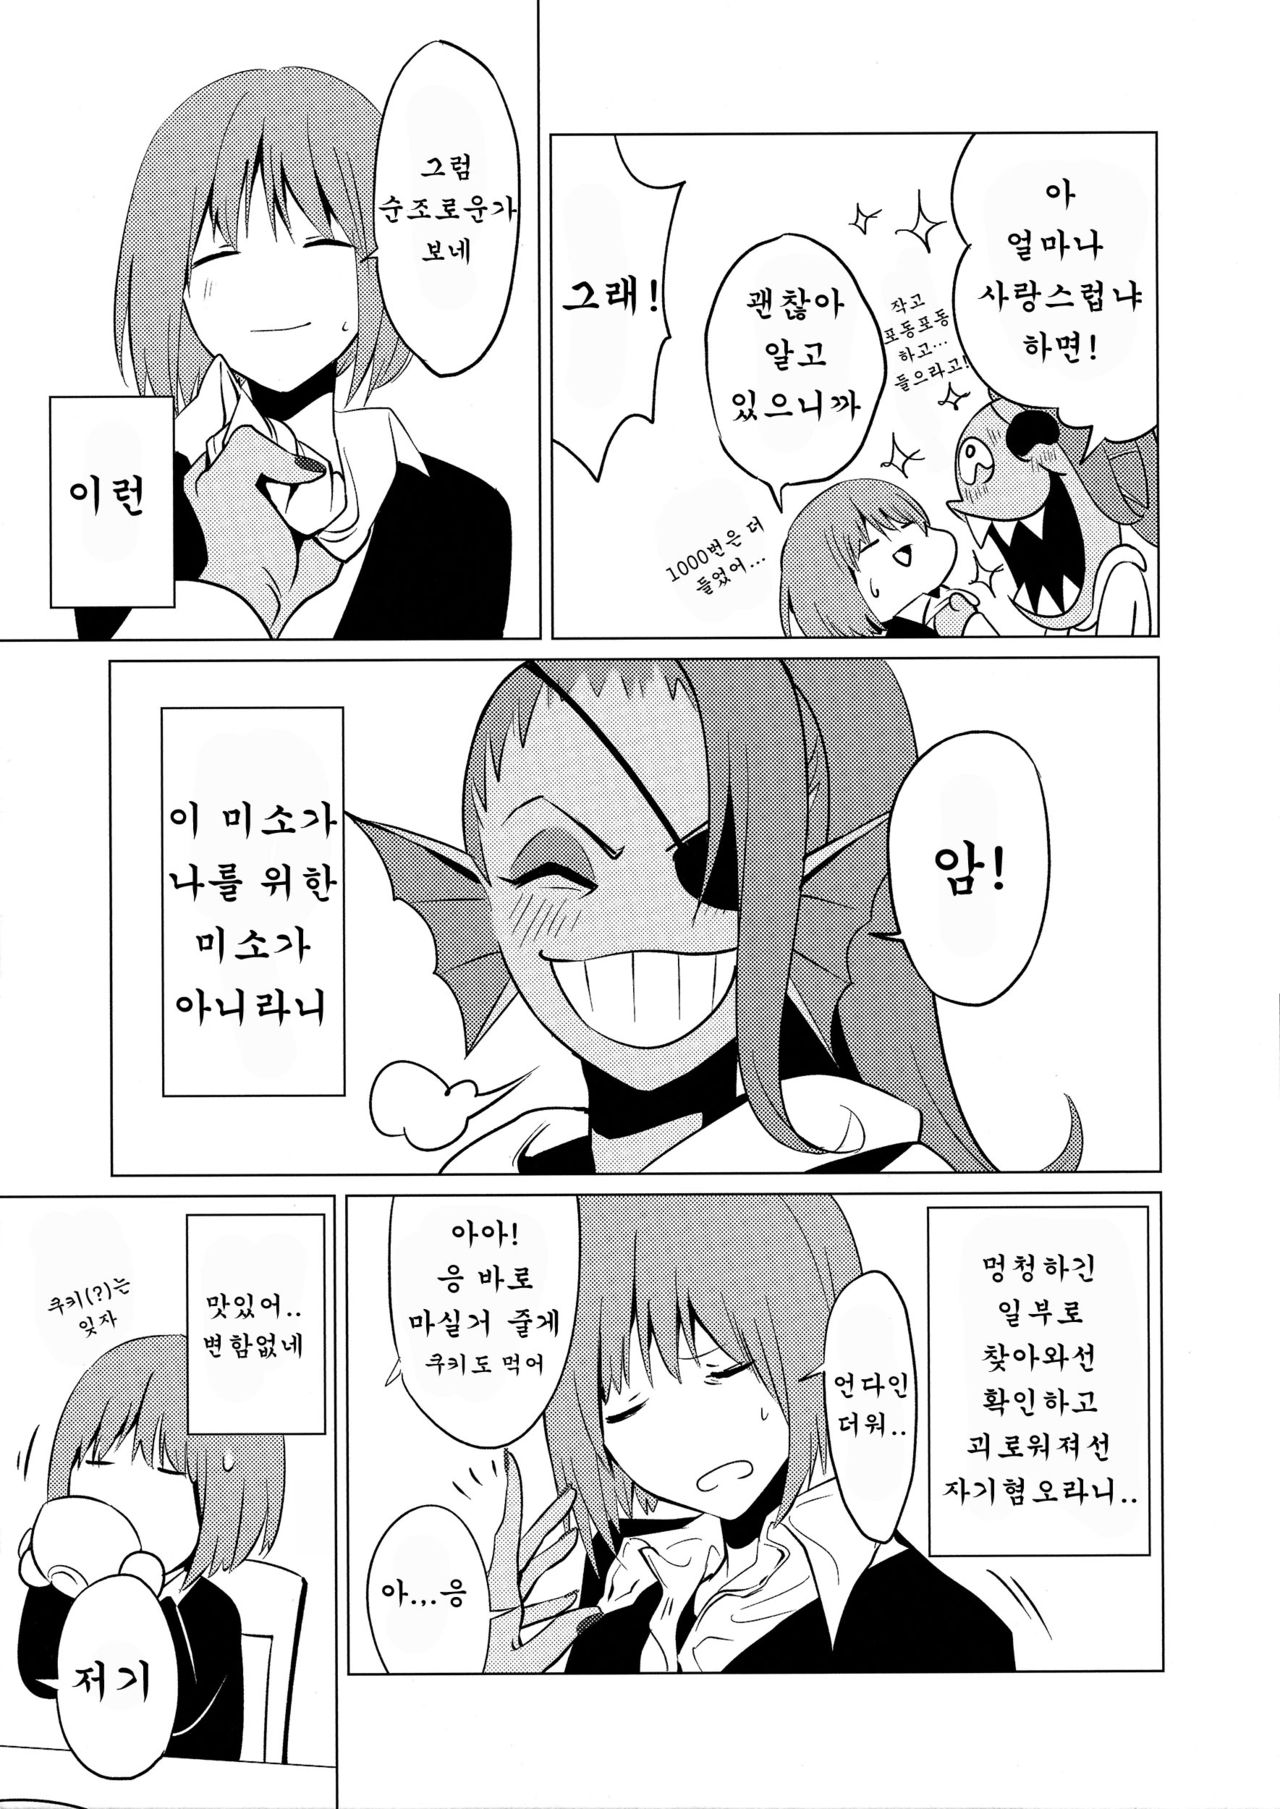 (Minna no Ketsui 2) [Pipiya (Noix)] CLEARLY (Undertale) [Korean] [호접몽] (みんなの決意2) [ぴぴや (のあ)] CLEARLY (Undertale) [韓国翻訳]